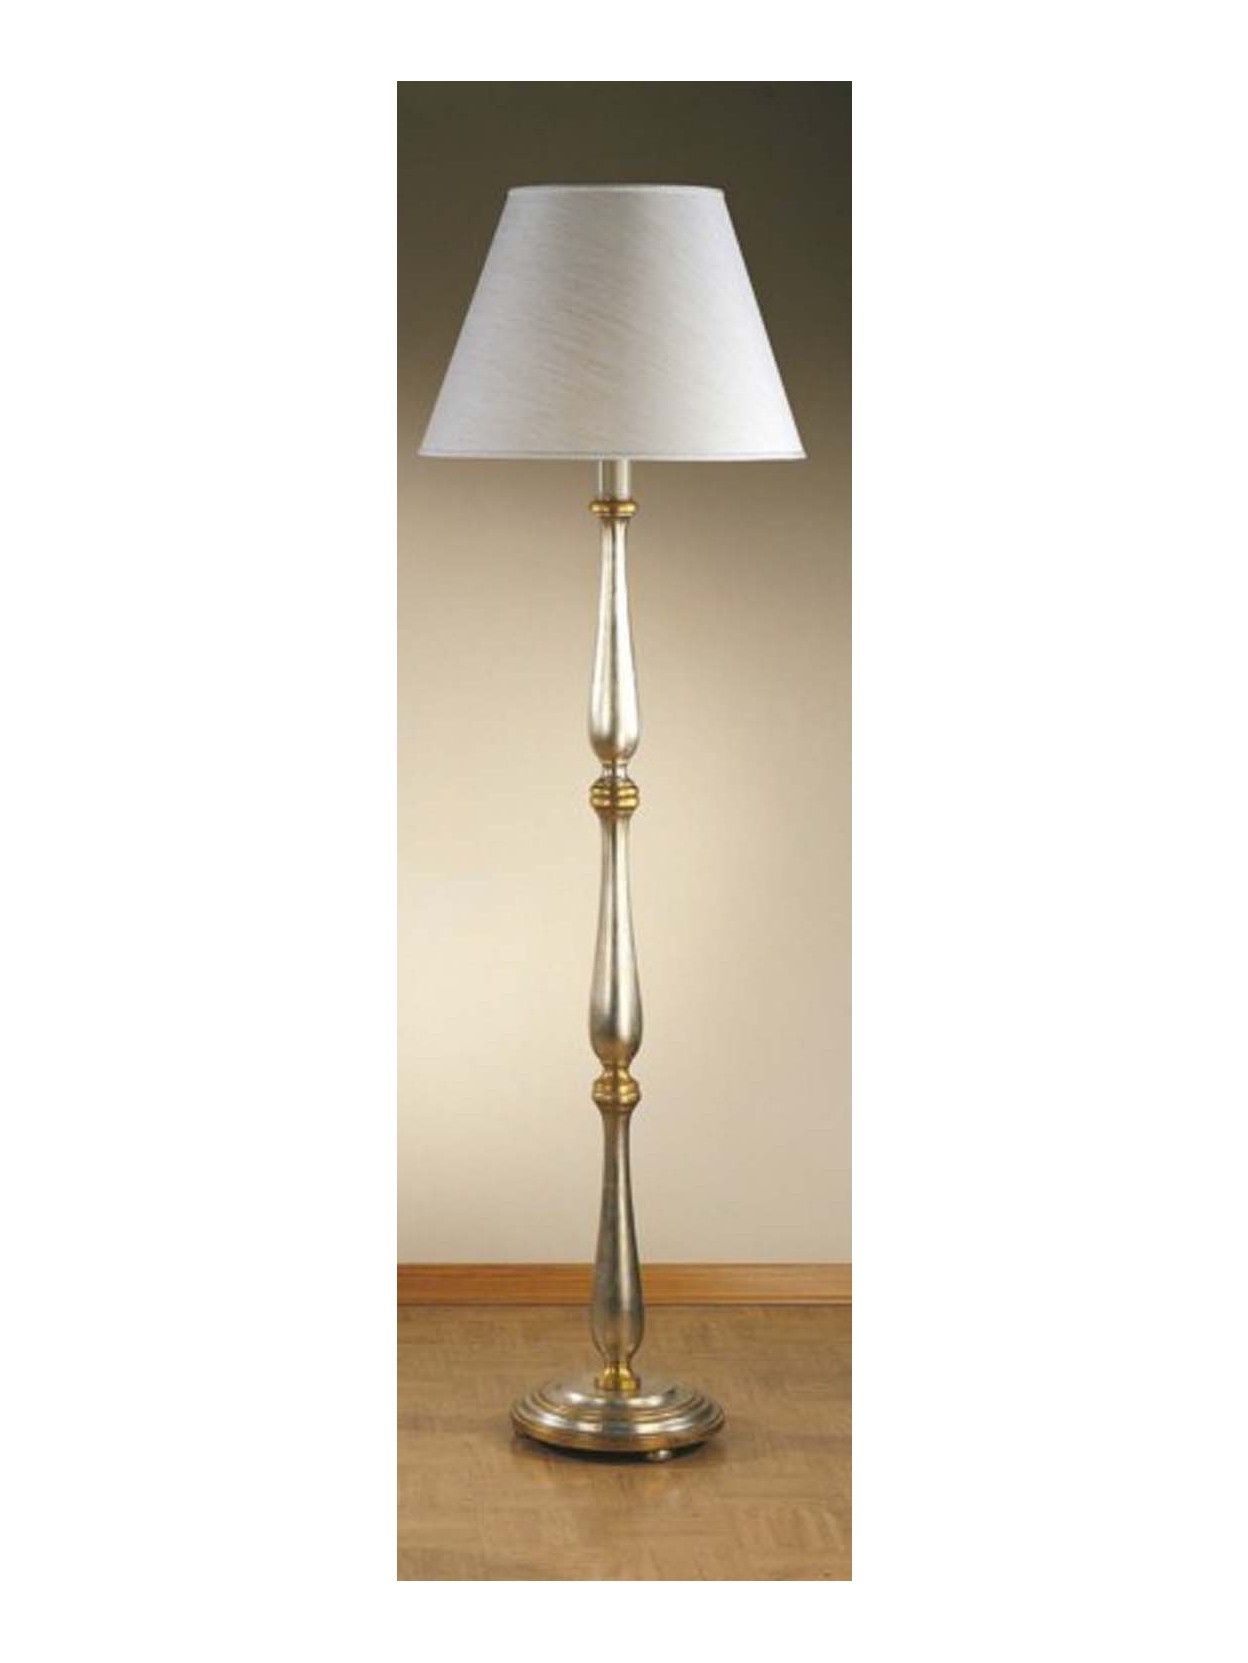 Classic Floor Lamp In Silver Gold Leaf Wood 1 Esse 70 / T Light Throughout Silver Floor Lamps (View 8 of 20)